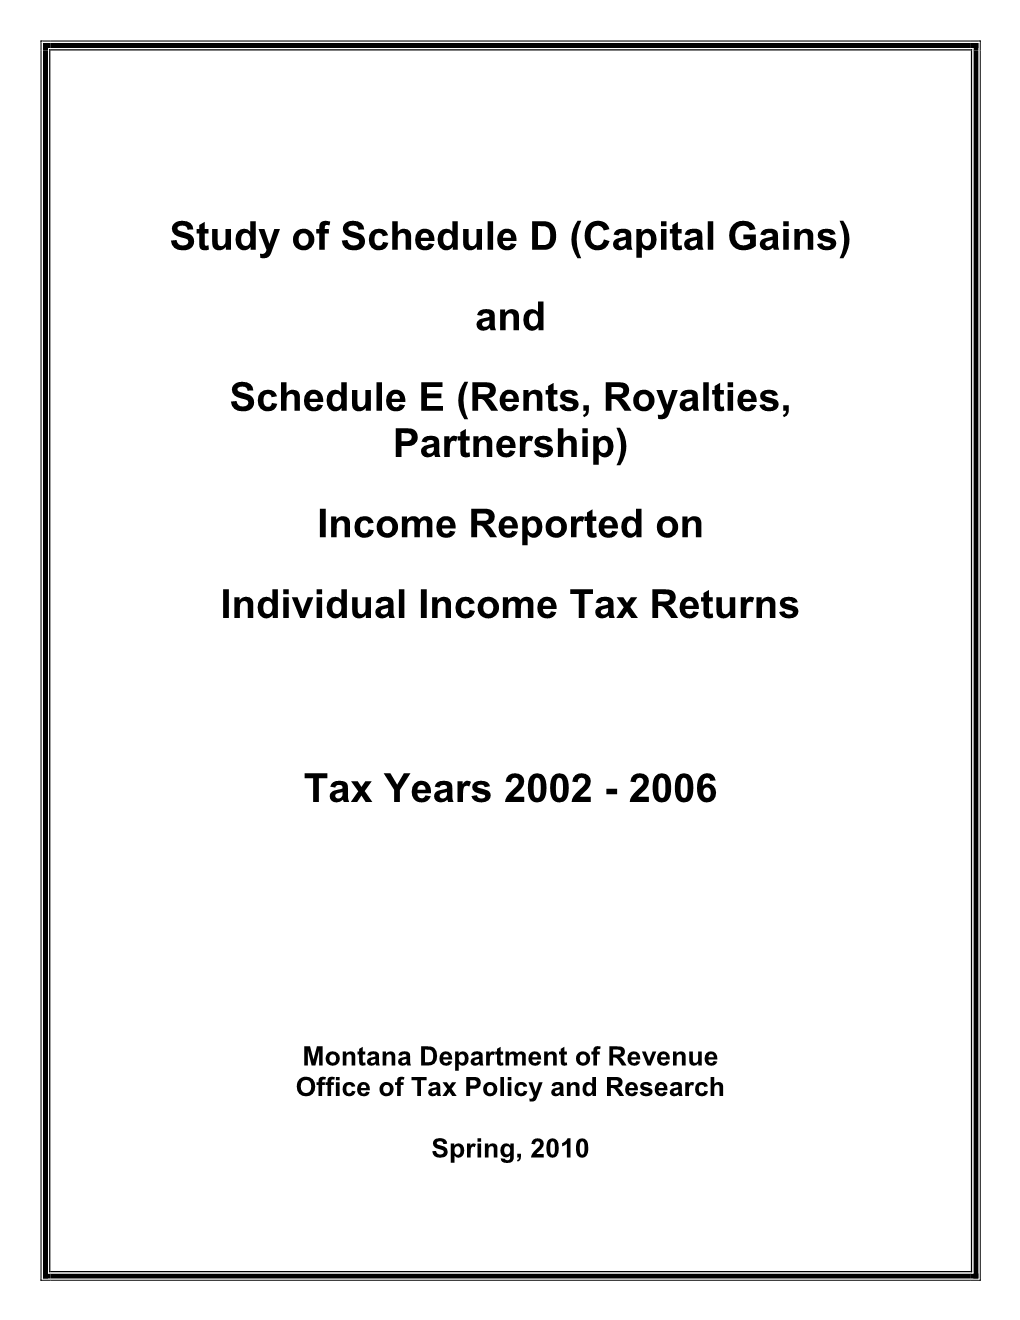 Capital Gains) and Schedule E (Rents, Royalties, Partnership